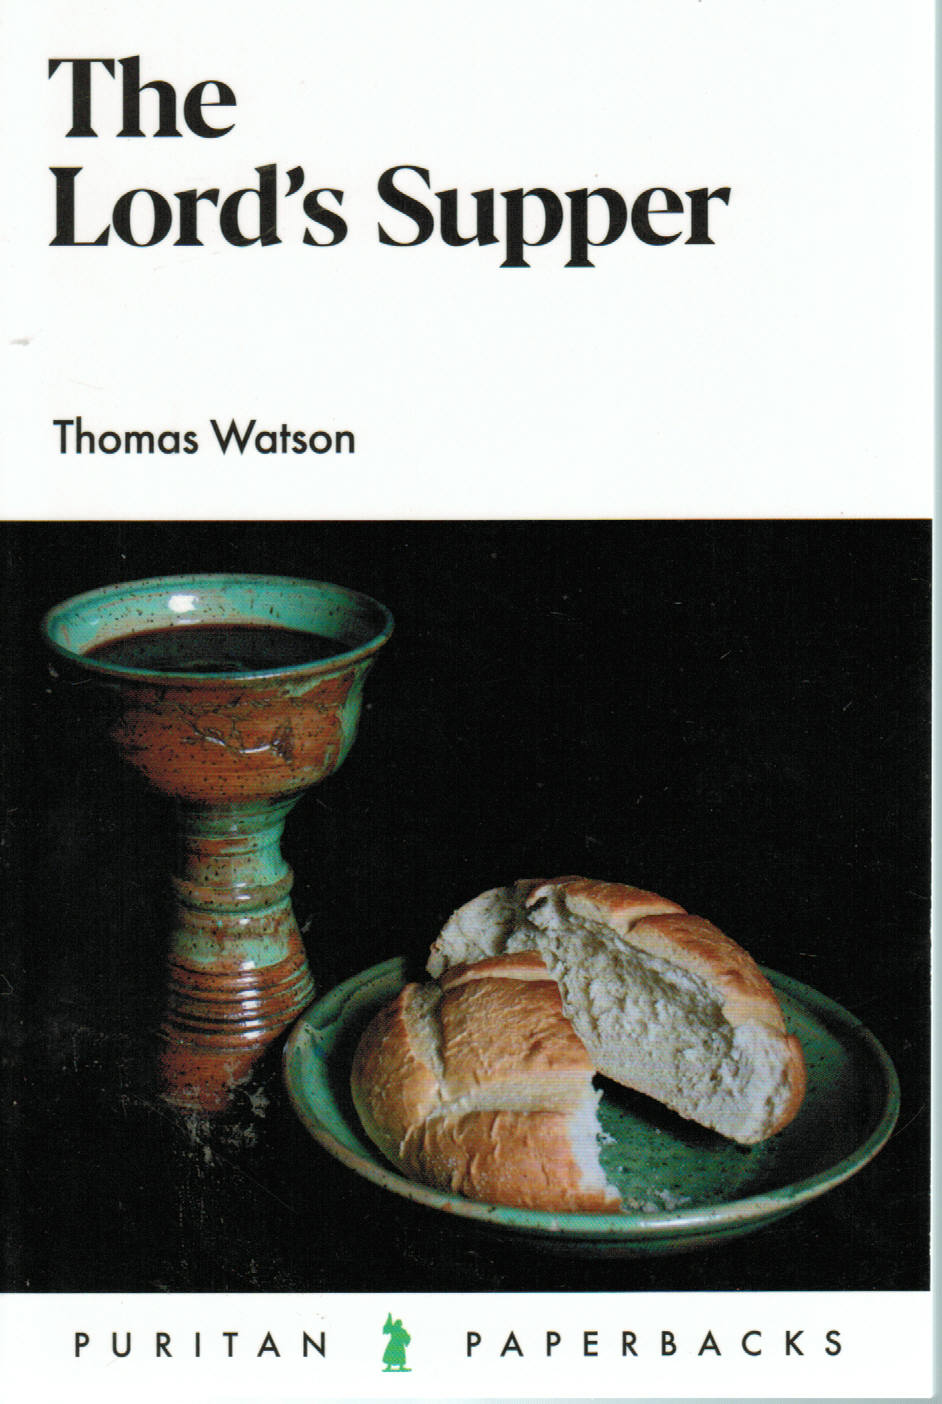 Puritan Paperbacks - The Lord's Supper